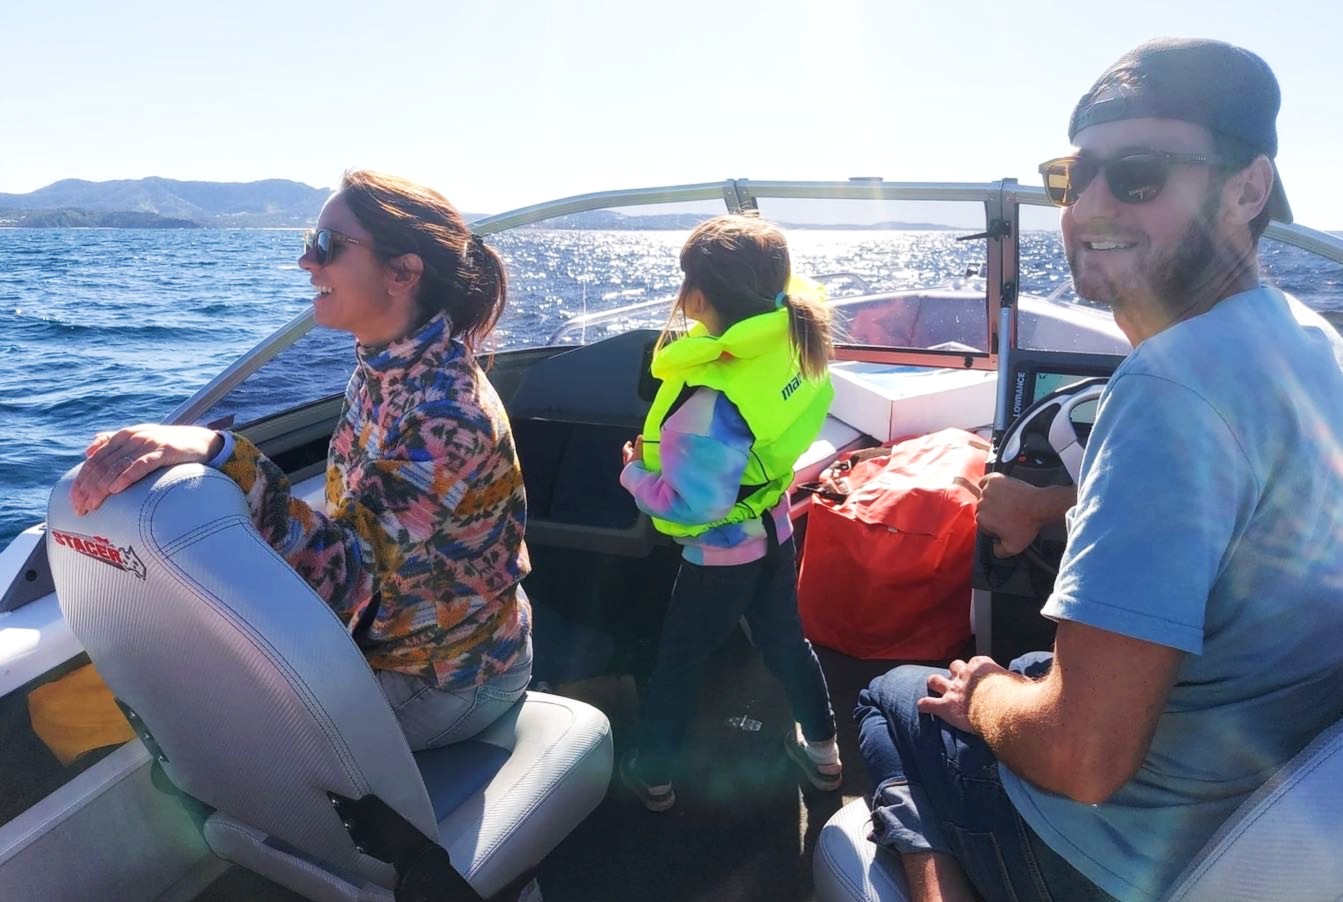 Boating With Kids: 7 Tips on How To Stay Safe and Have Fun